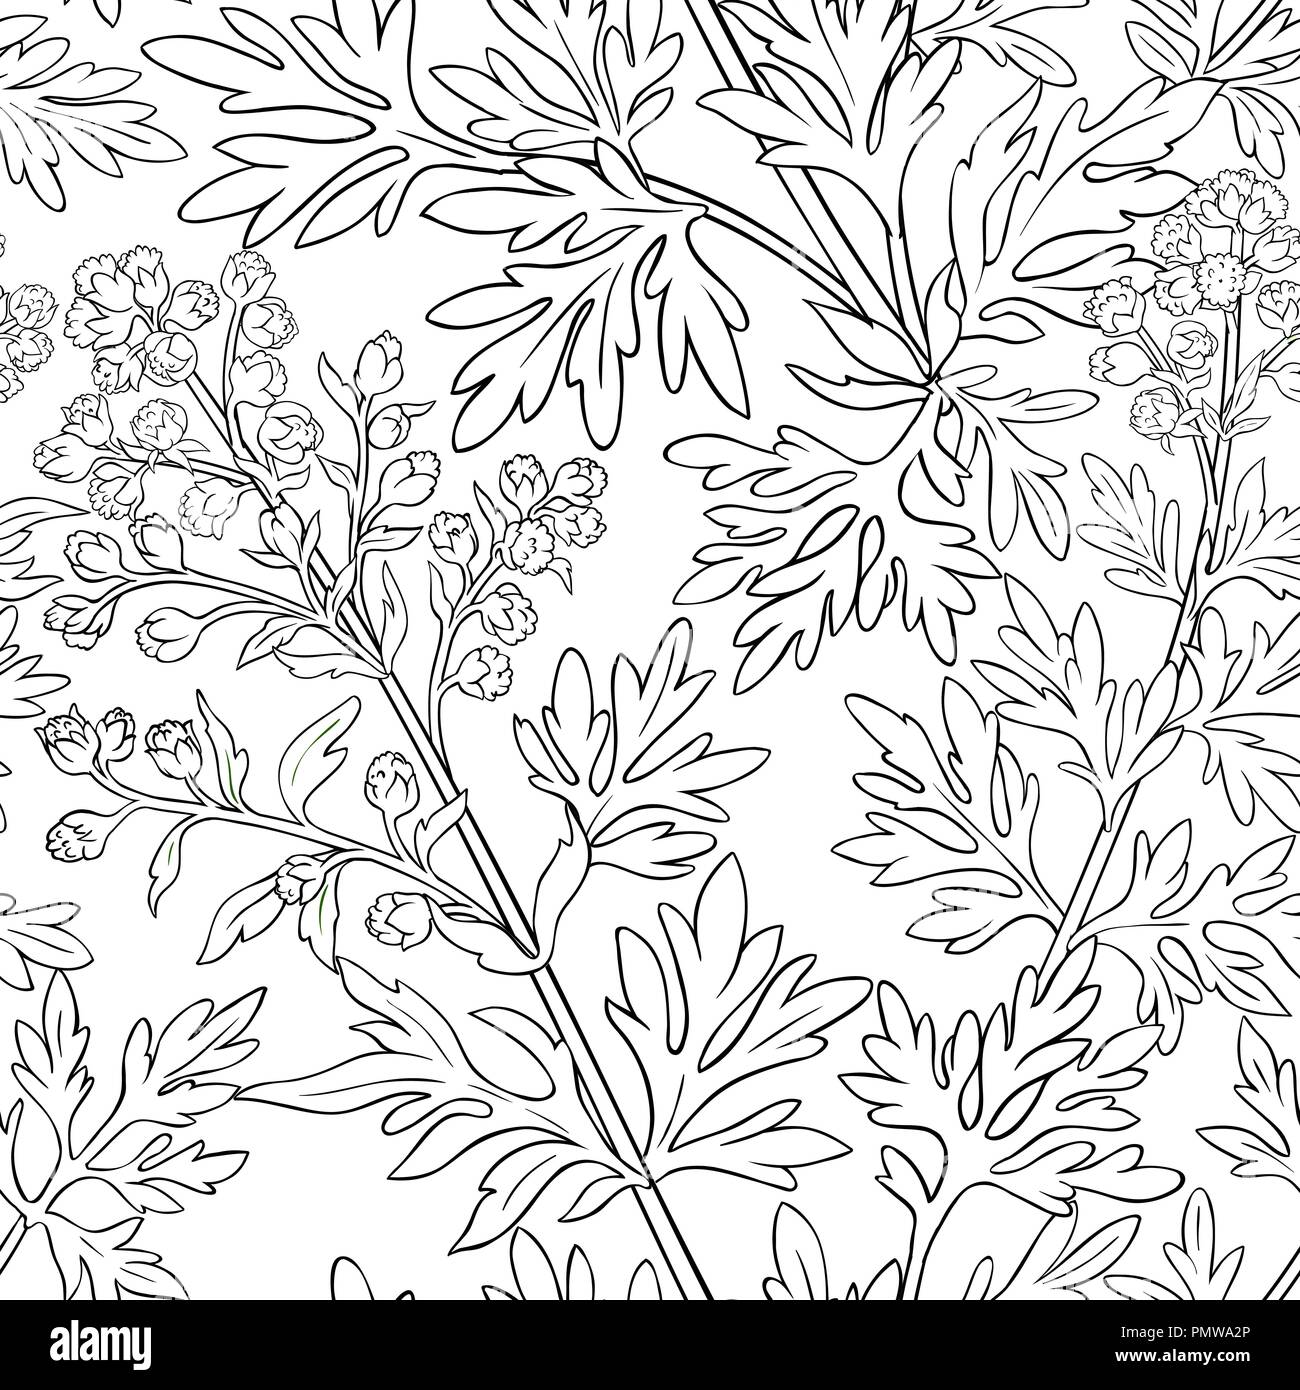 wormwood vector pattern on whte  background Stock Vector